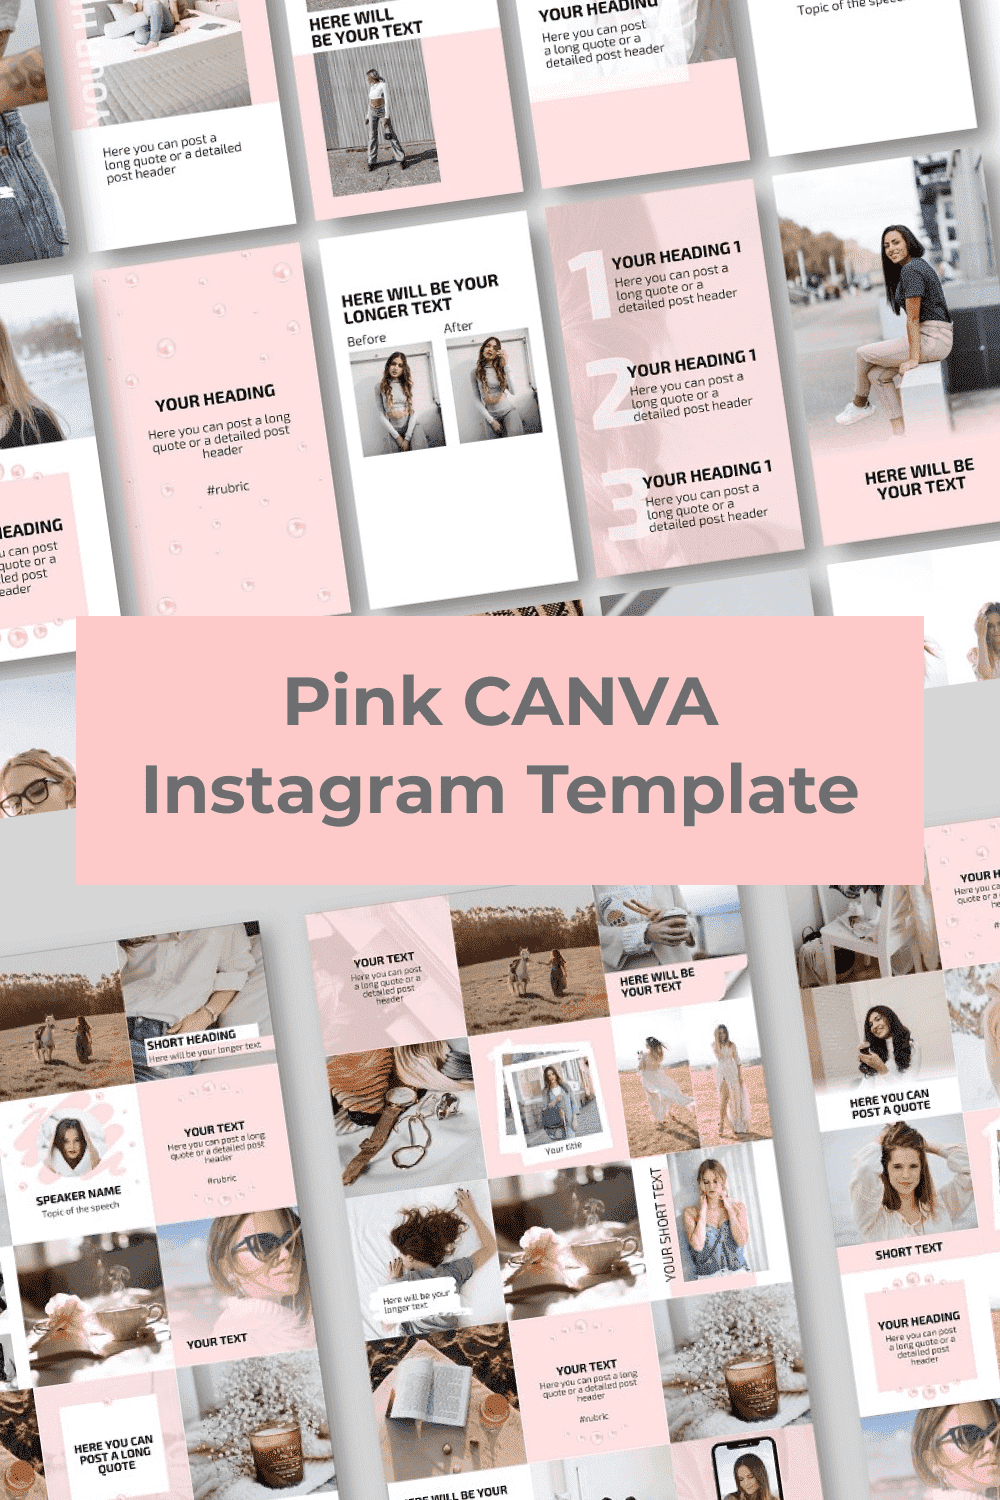 Pink CANVA Instagram Templates With Examples.